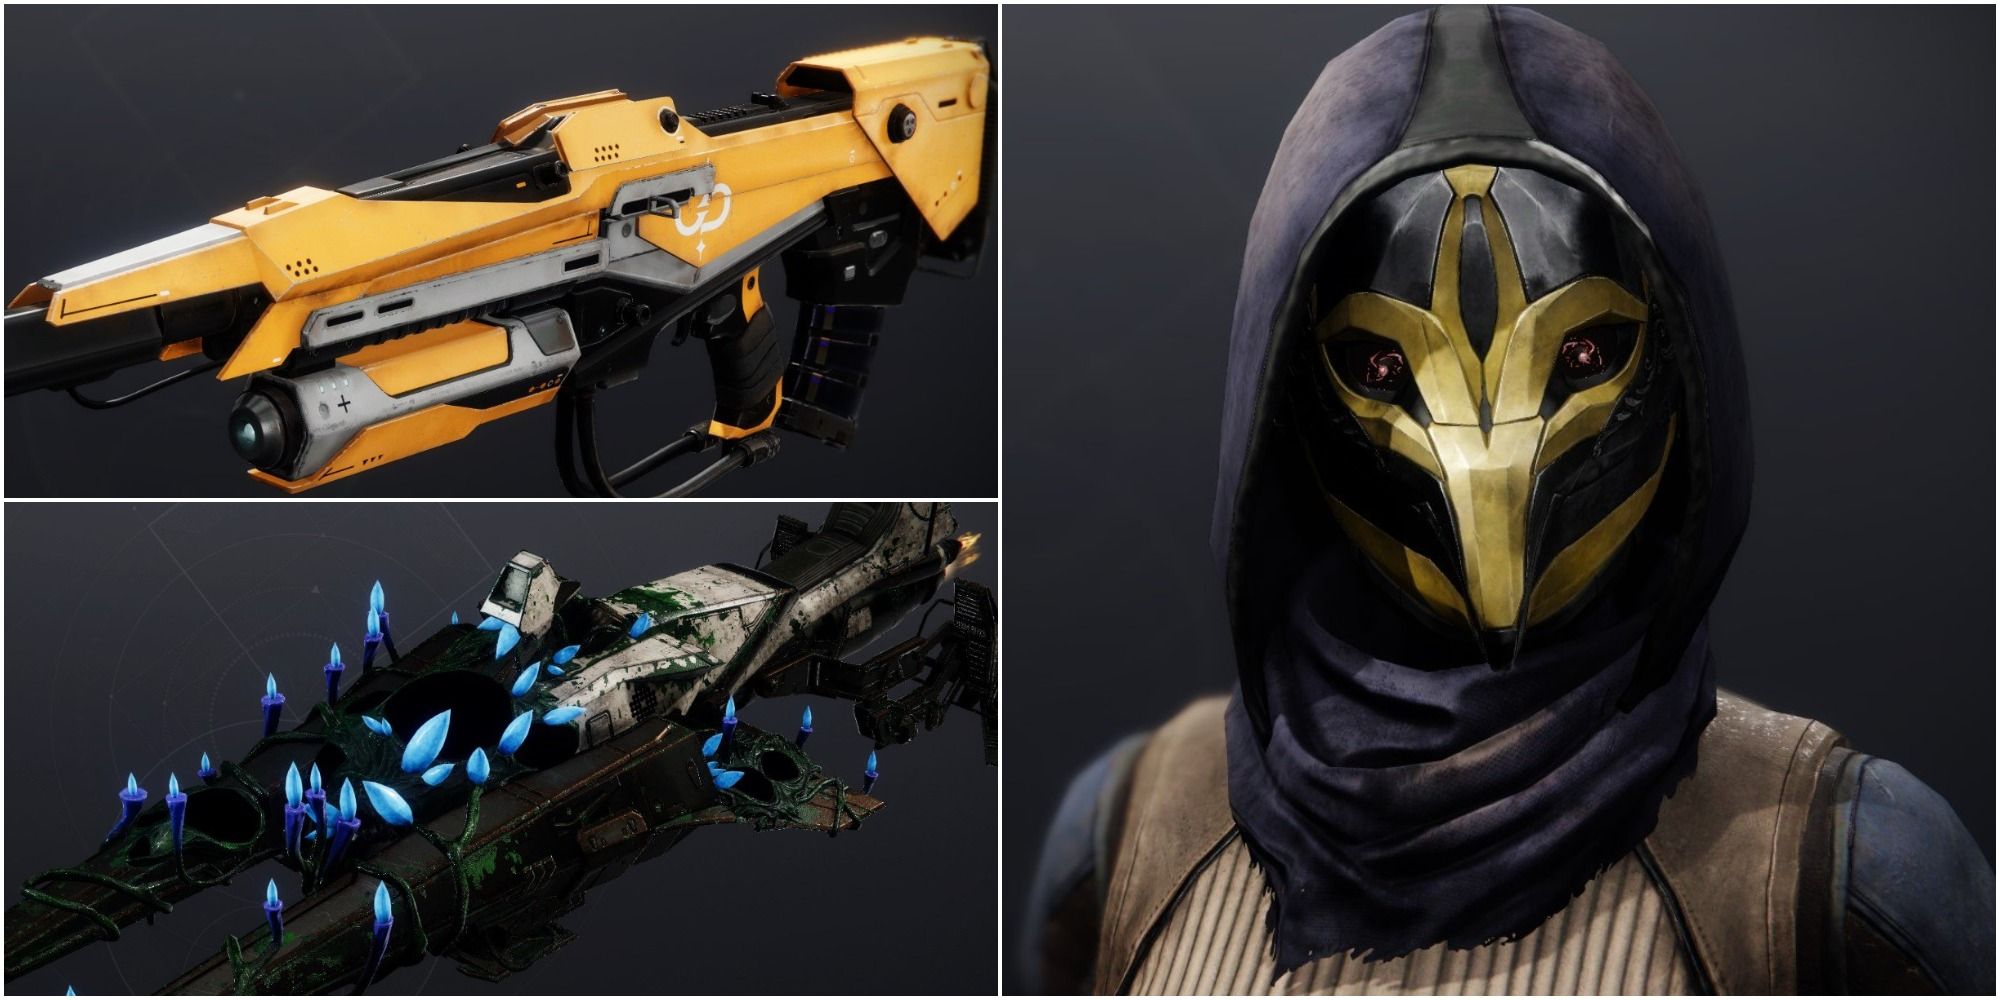 The Golden Days Exotic Weapon Ornament, Cordyception Exotic Sparrow, and Cathartdae Filigree Hunter Ornament in Destiny 2